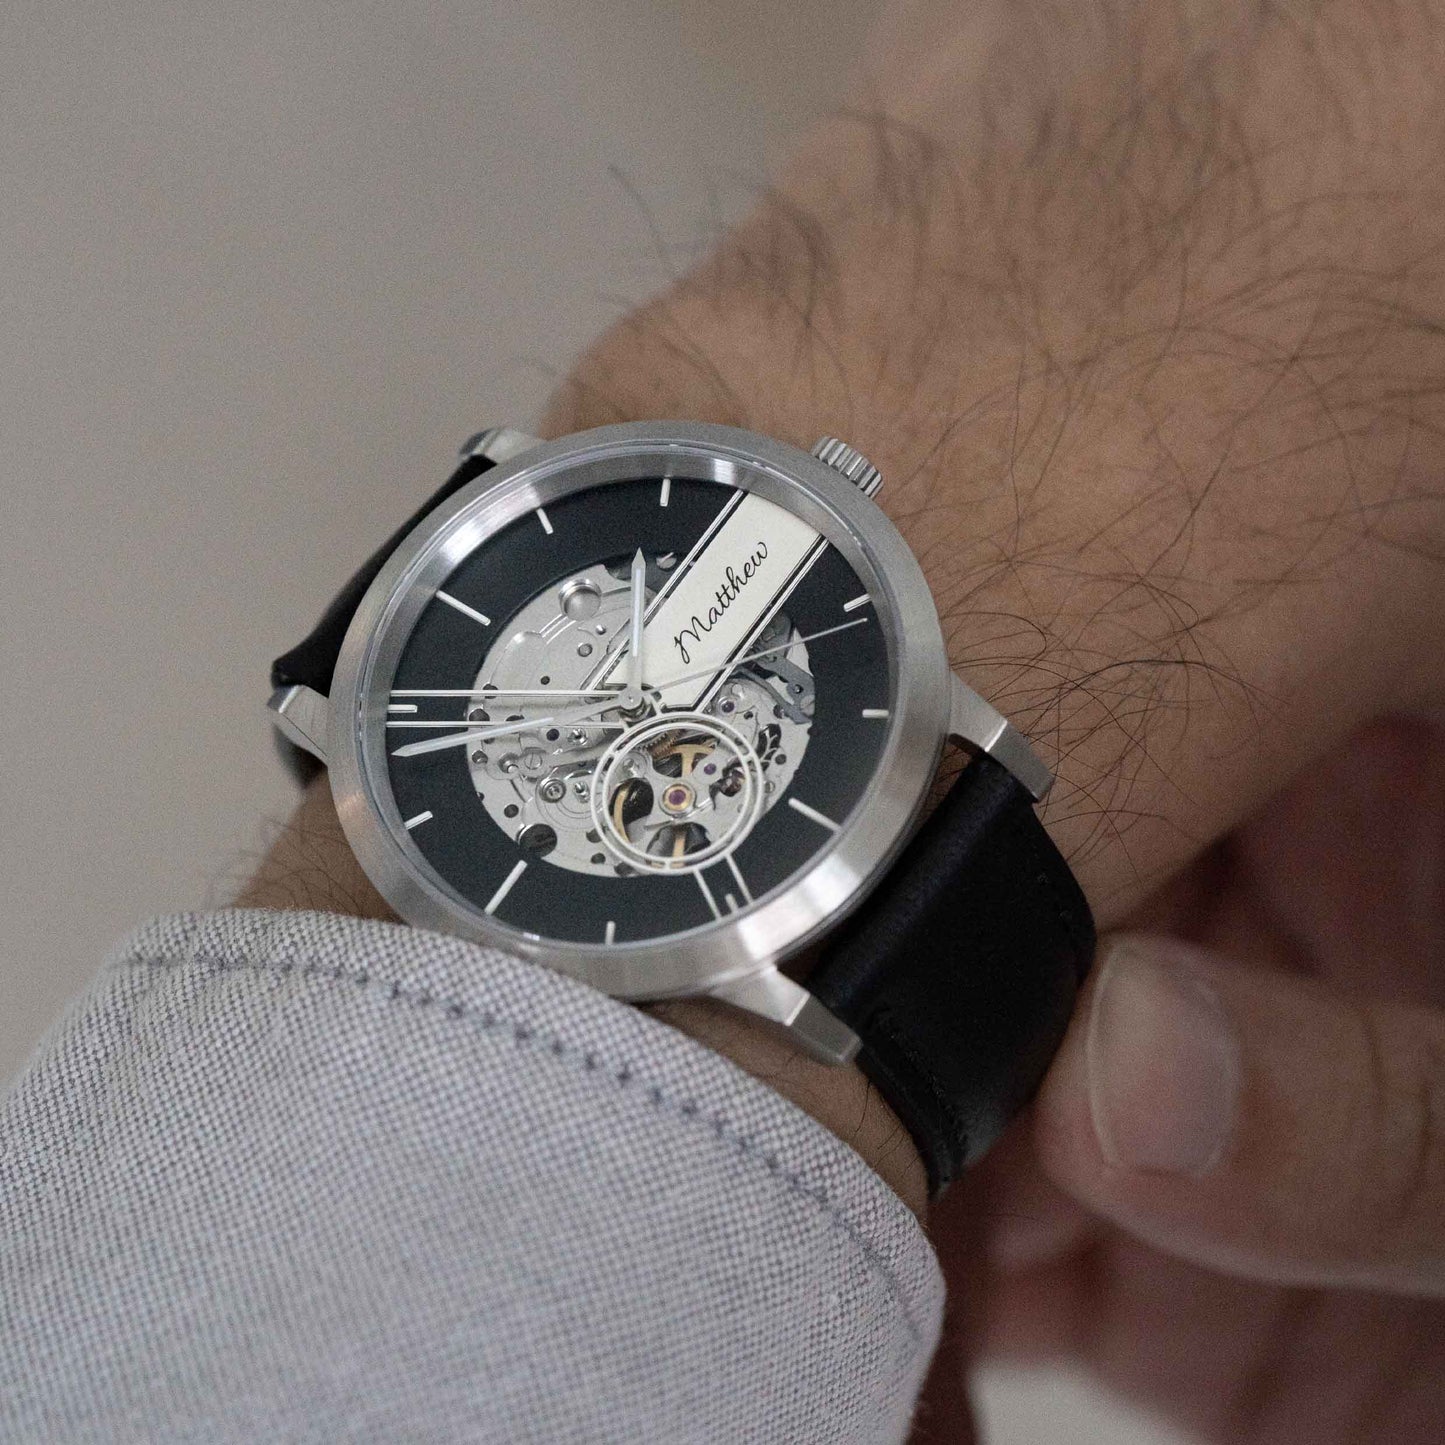 Automatic watch for men. 42mm in size, sapphire crystal, miyota movement, see through case back. Custom made watch dial - EONIQ